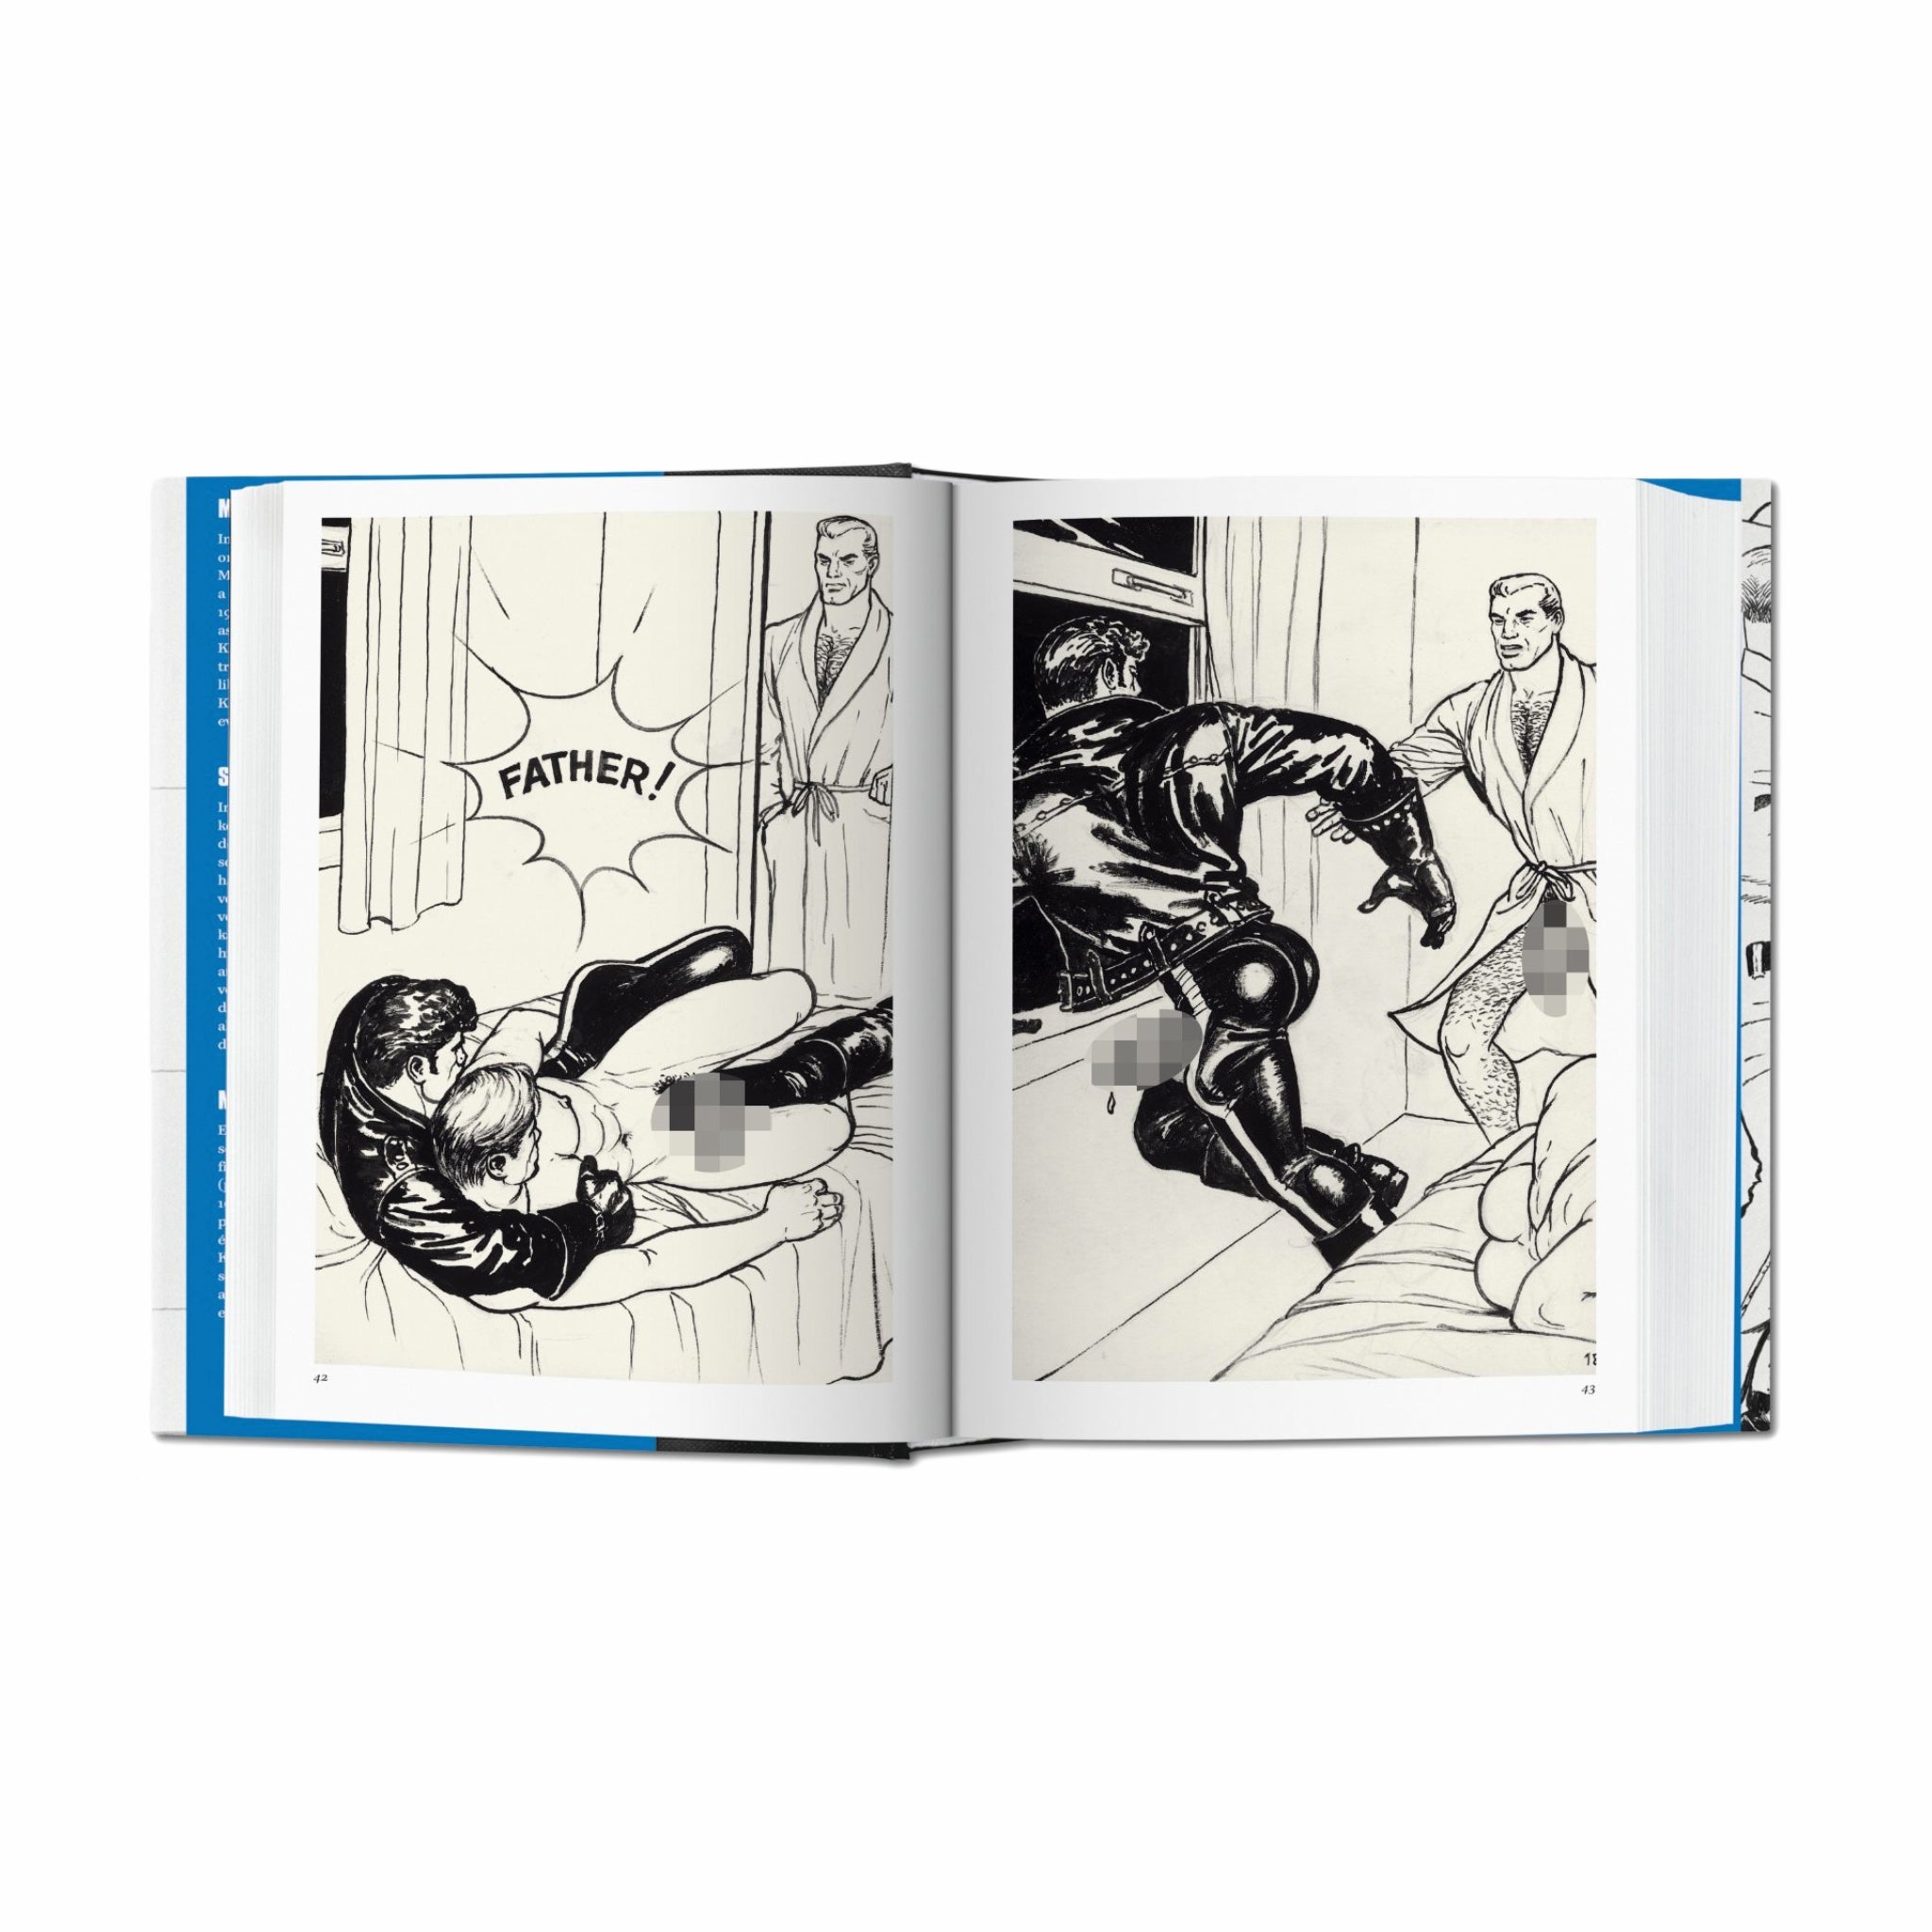 Taschen Tom of Finland The Complete Kake Comics (Hardcover) - August Shop